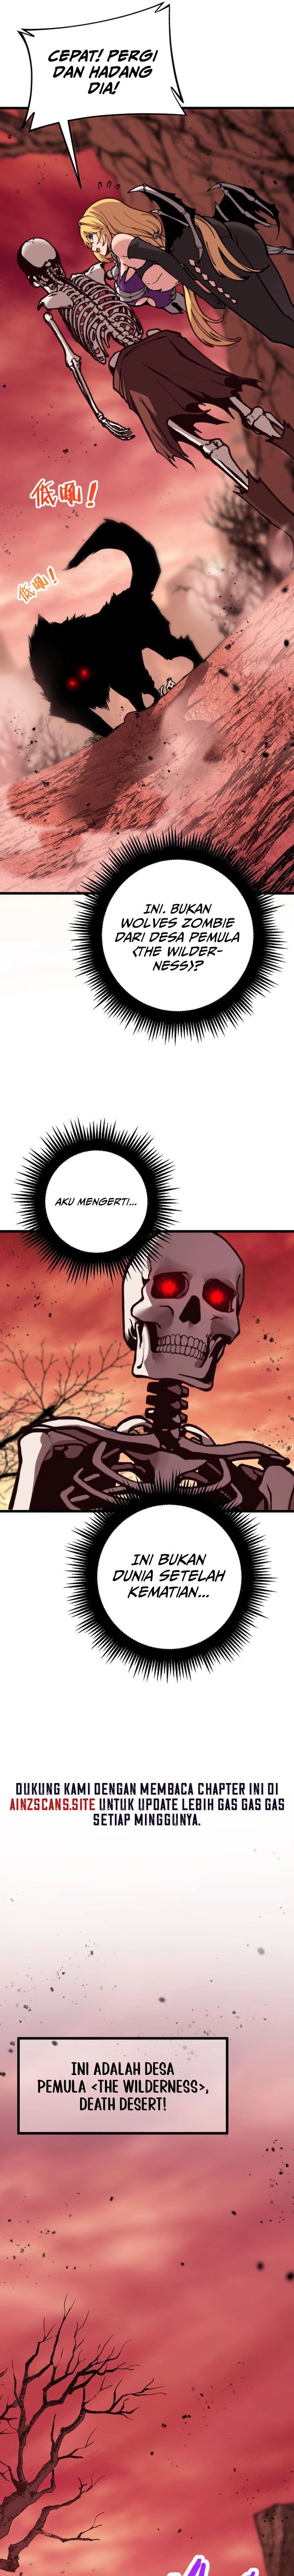 Skeleton Evolution: Starting from Being Summoned by a Goddess Chapter 01